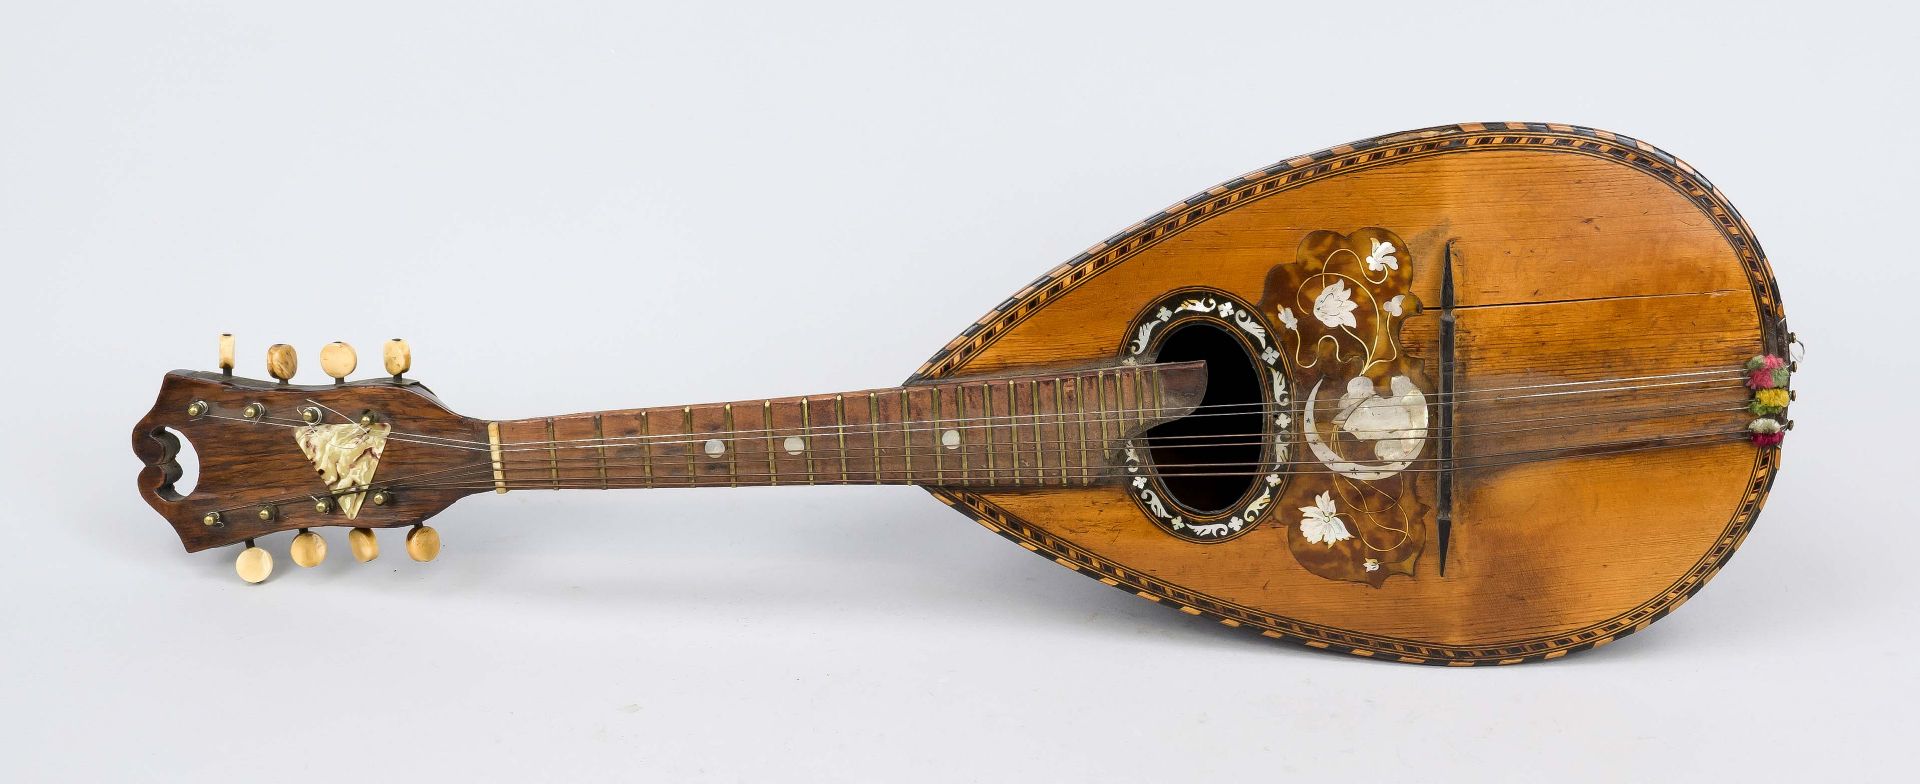 Mandolin, 19th/20th century, ribbed body, decorated with mother-of-pearl and ebony inlays, inside